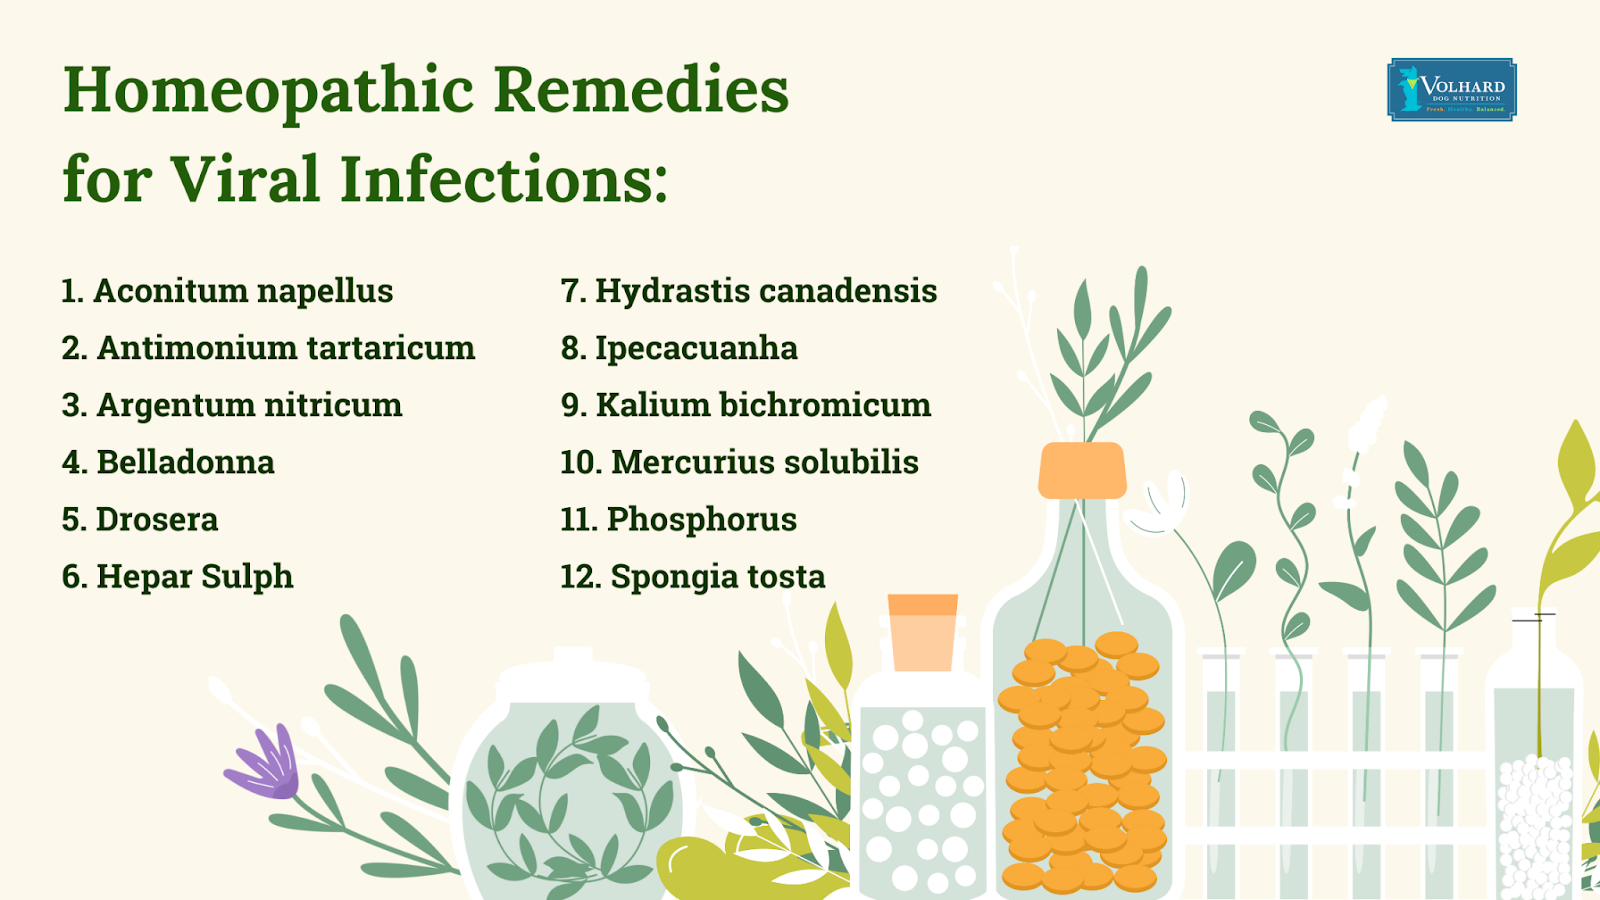 Homeopathic remedies for viral infections